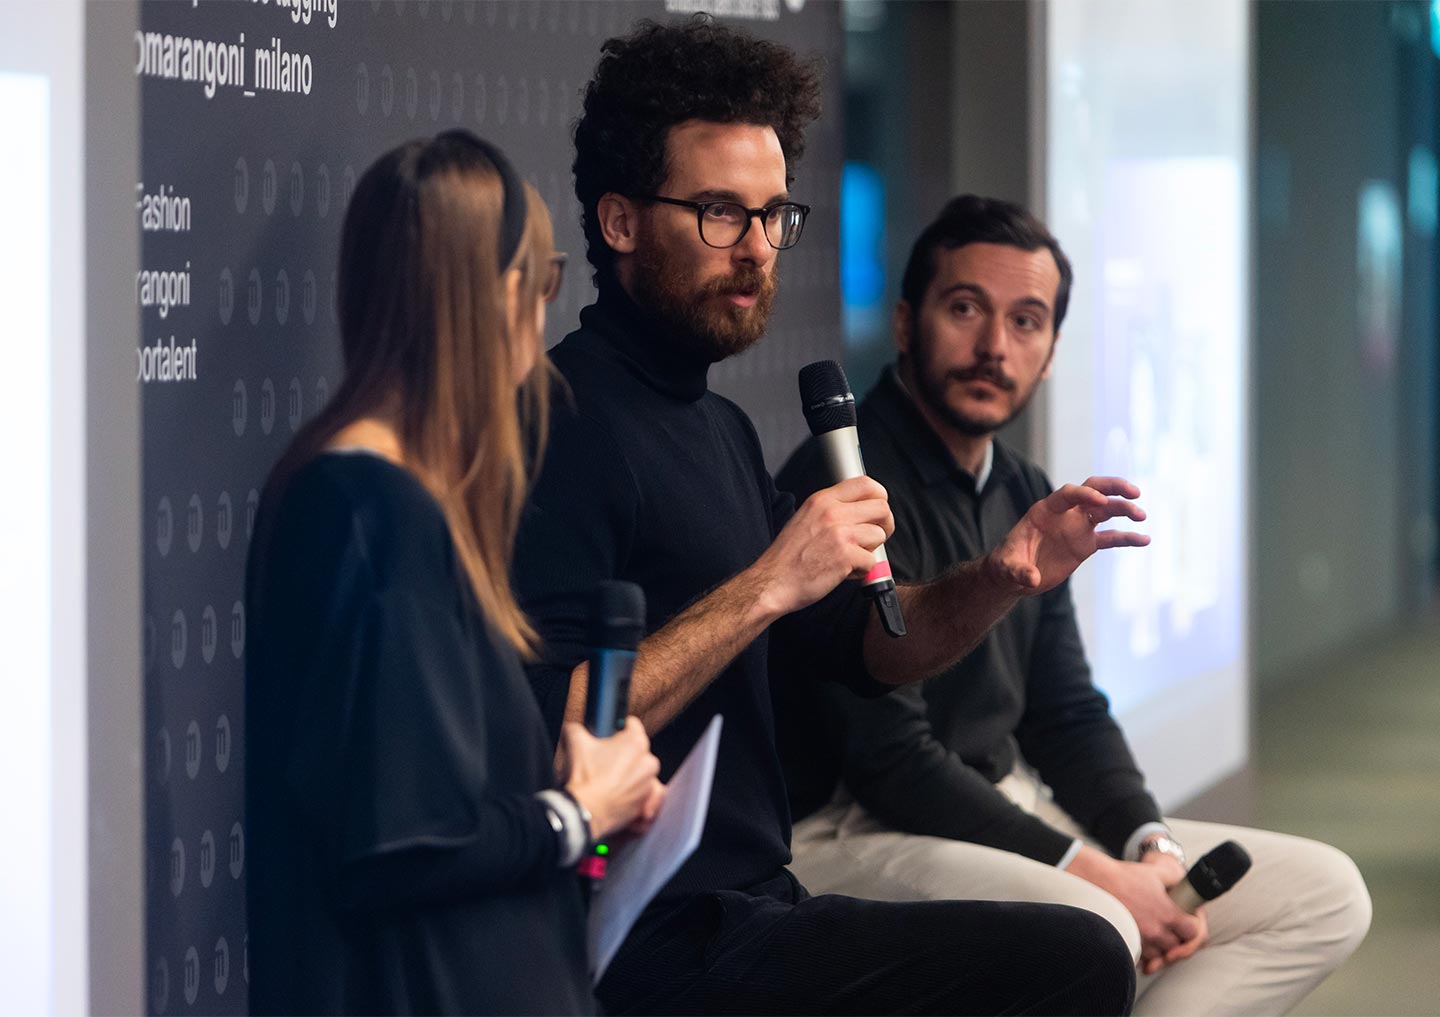 From left to right, Francesco Bernabei, CEO of Monogrid, and Andrea Lorini, Head of Collabs & Partnerships and Head of NFTs, Metaverse & Gaming at Luxottica, at Istituto Marangoni Milano